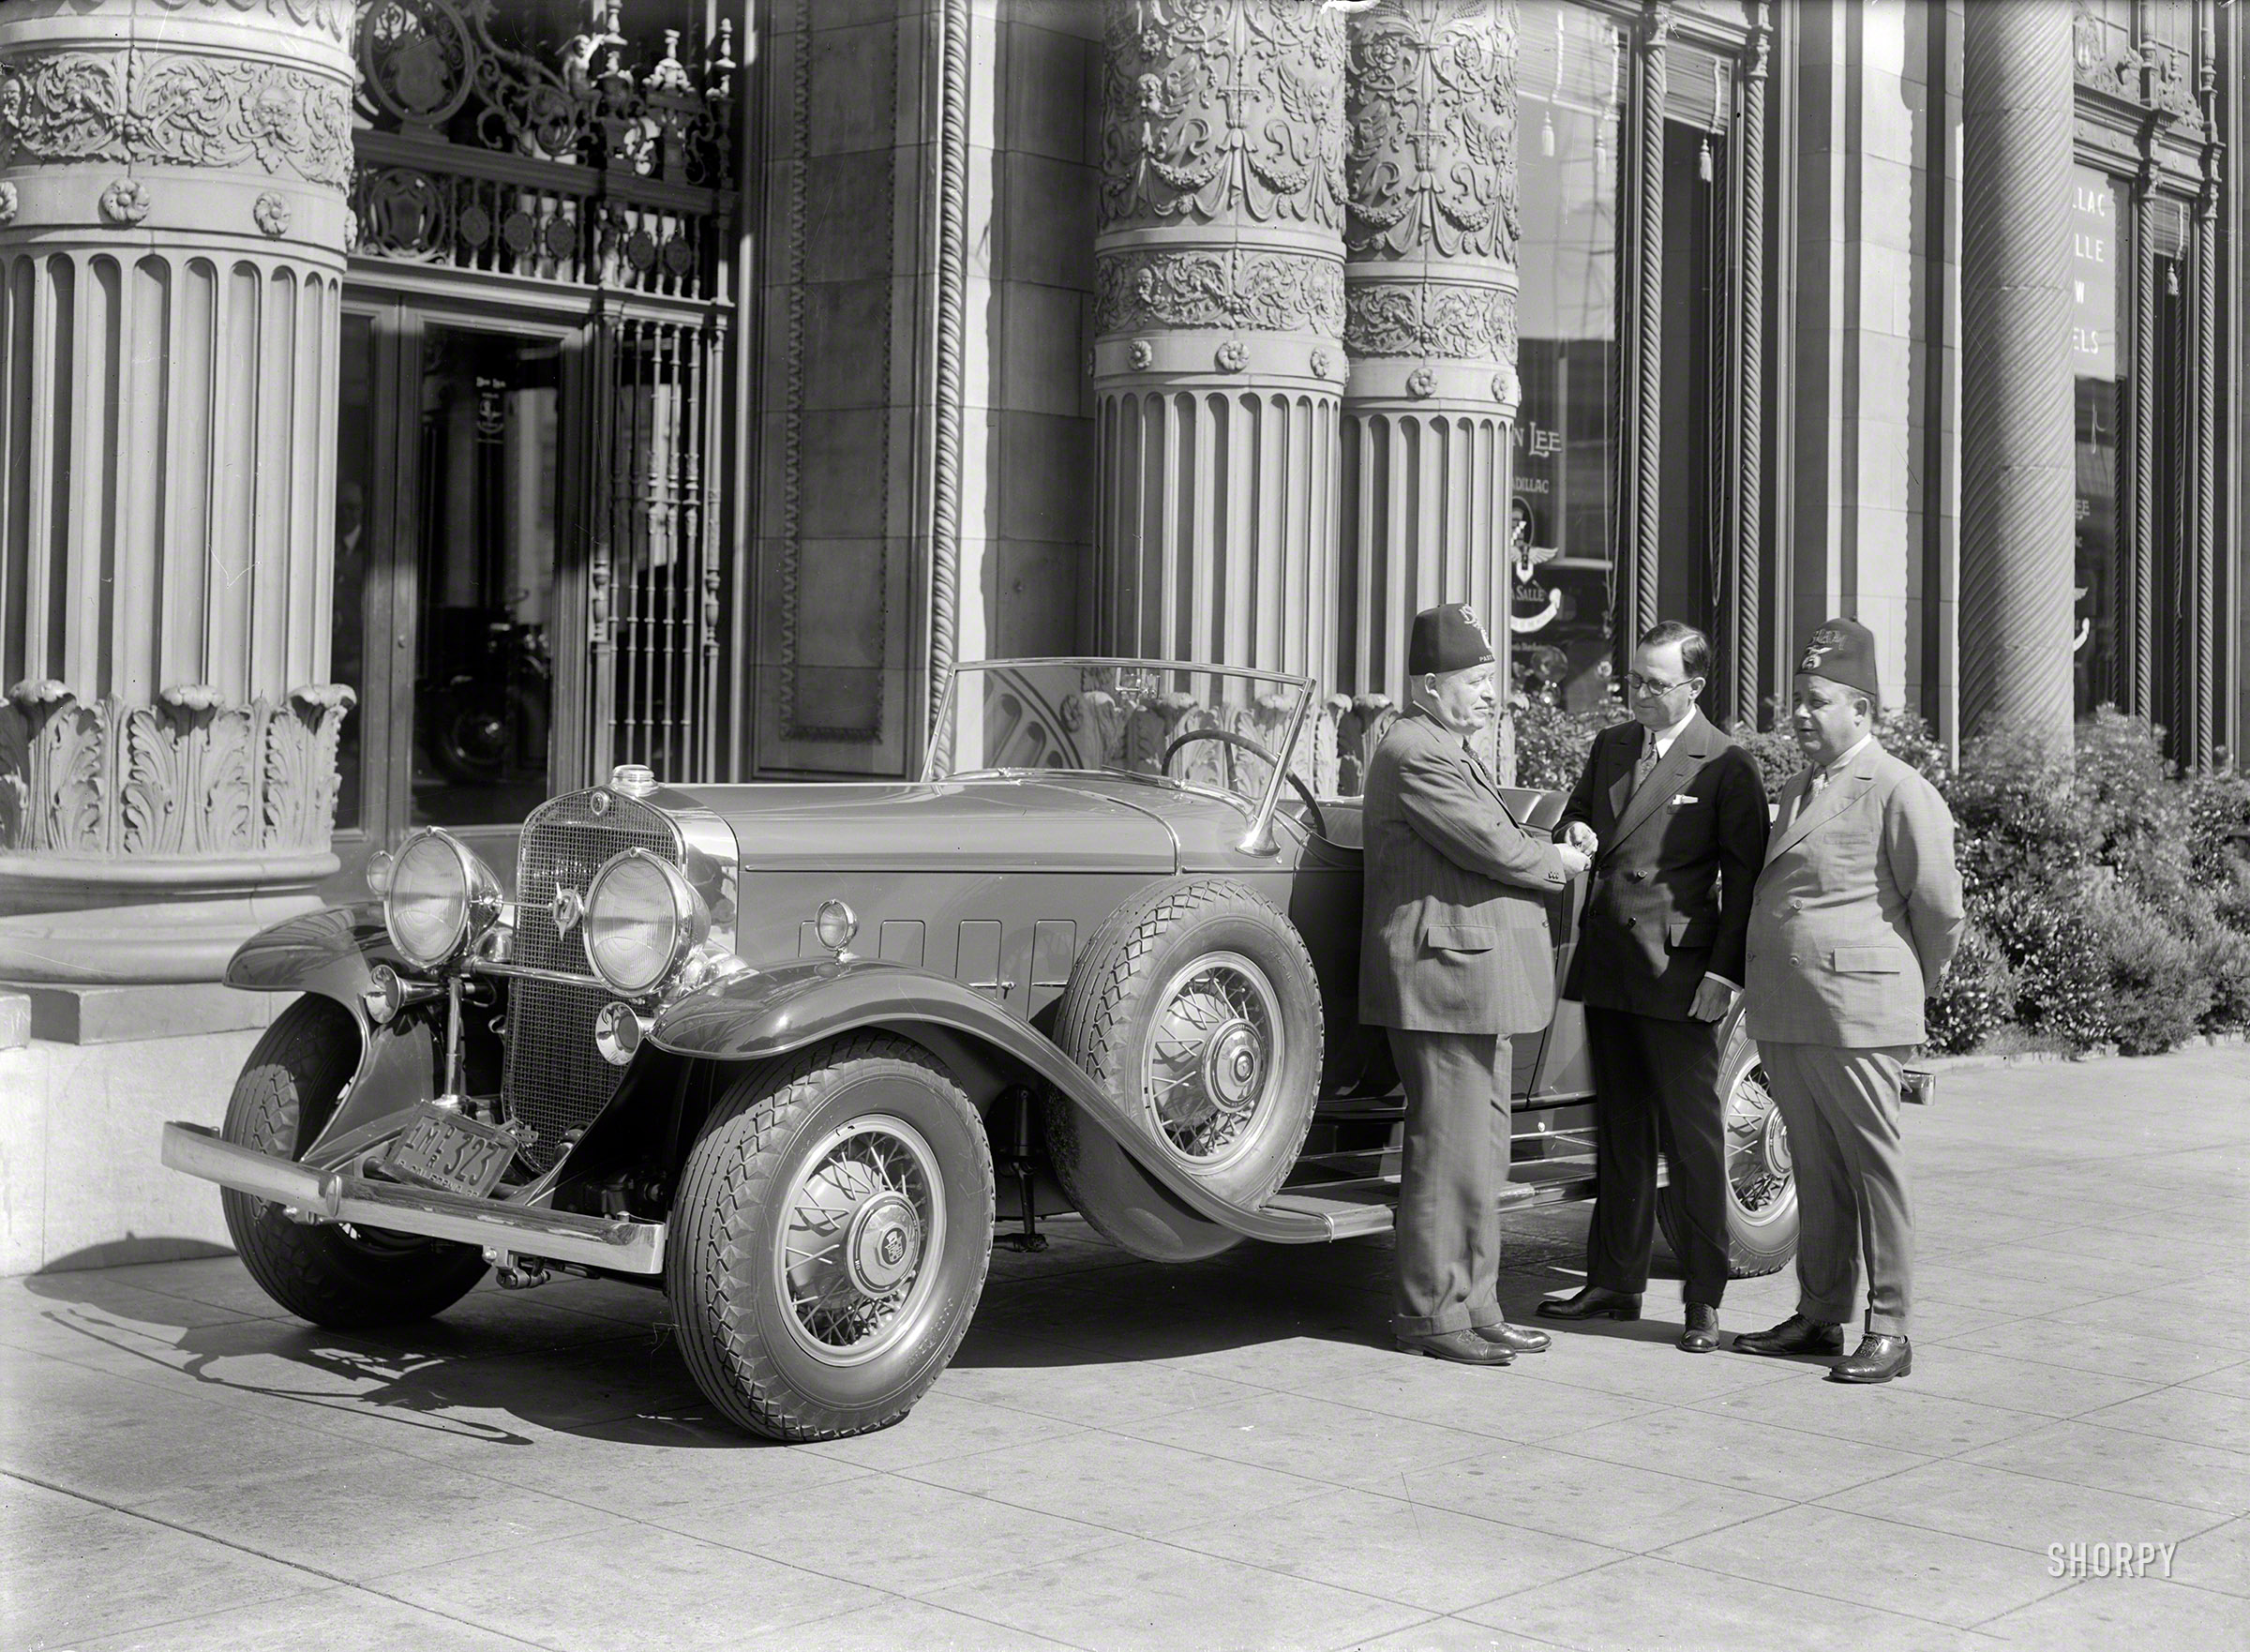 &nbsp; &nbsp; Don Lee handing over the keys to a V-12 Cadillac touring car.
San Francisco, 1932. "Cadillac agency, NE corner Van Ness & O'Farrell." The monumental exterior of Don Lee Cadillac. Note the "ISLAM" fezzes of these Masonic potentates. 5x7 glass negative by Christopher Helin. View full size.